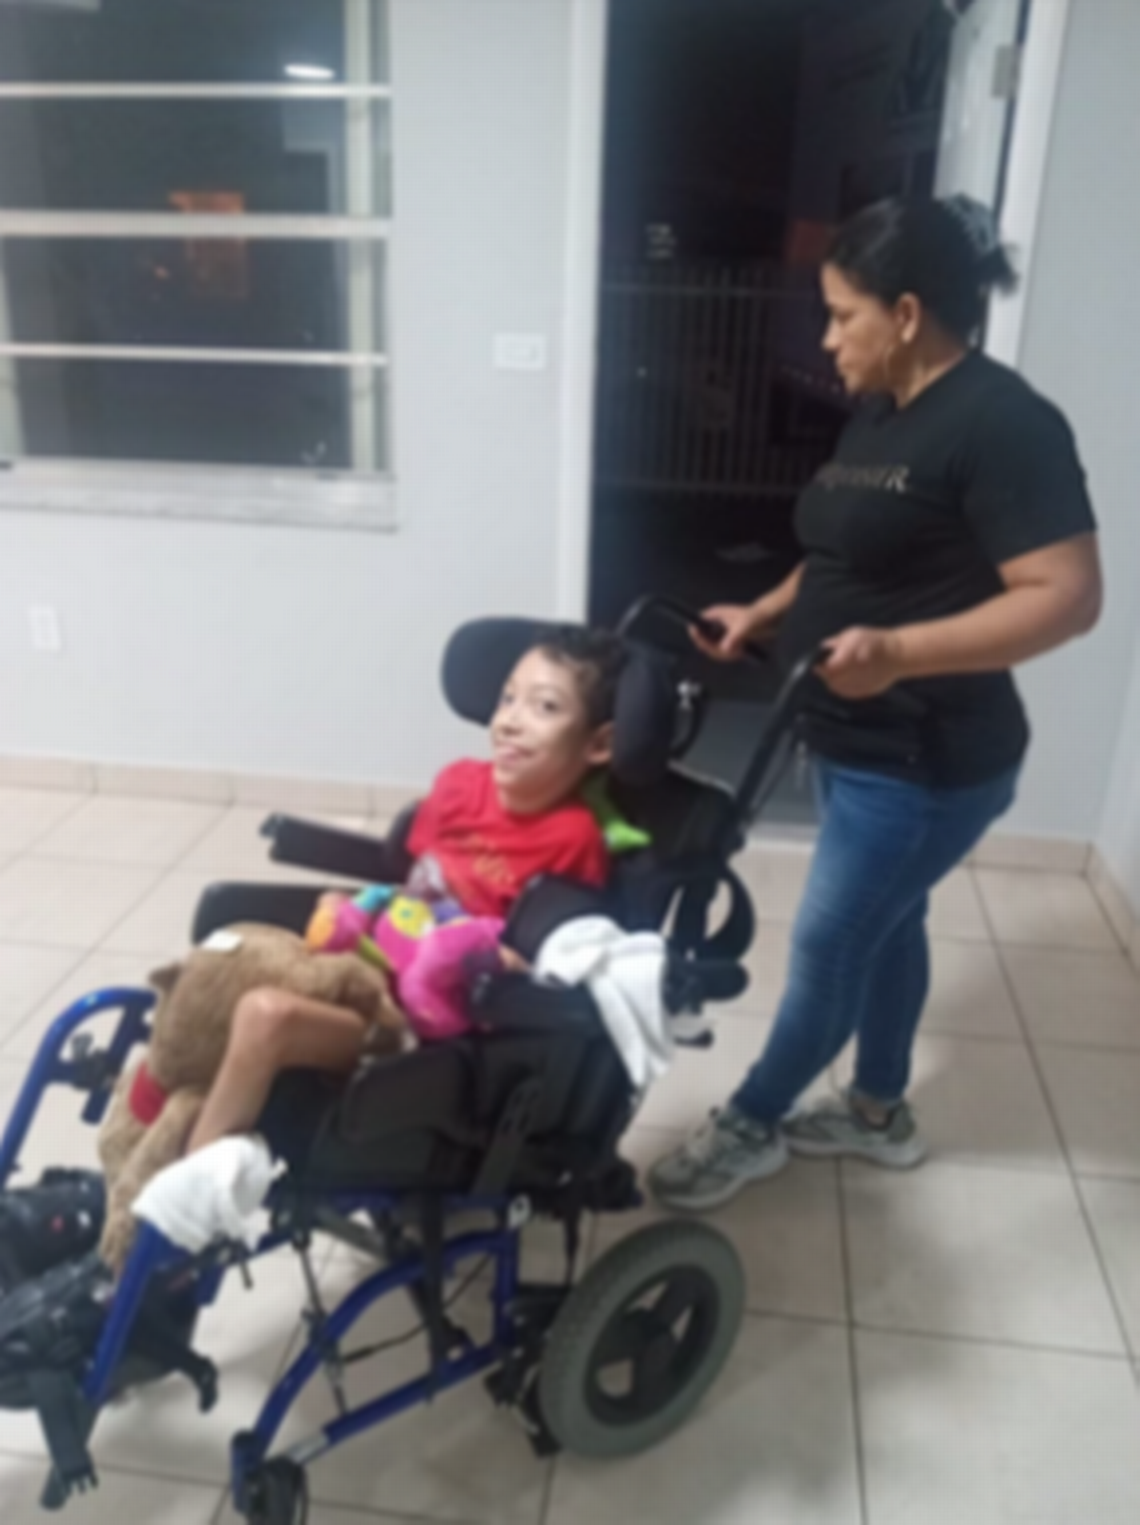 Erika Díaz and her son, 13-year-old José Andino Díaz, walk into their new home, funded by an anonymous Wish Book donor.